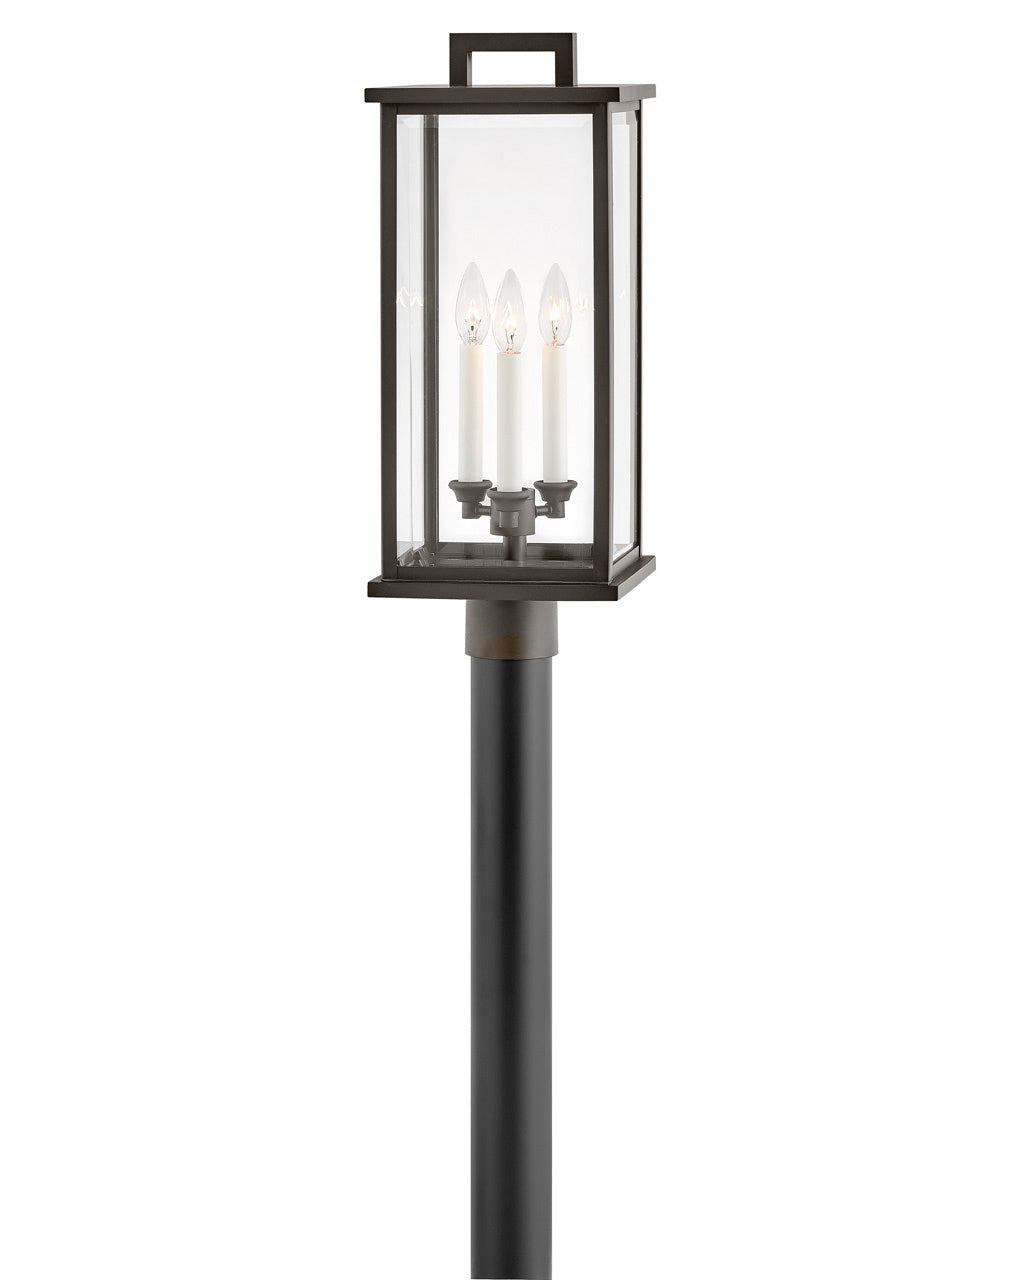 Hinkley Canada - LED Post Top or Pier Mount - Weymouth - Oil Rubbed Bronze- Union Lighting Luminaires Decor